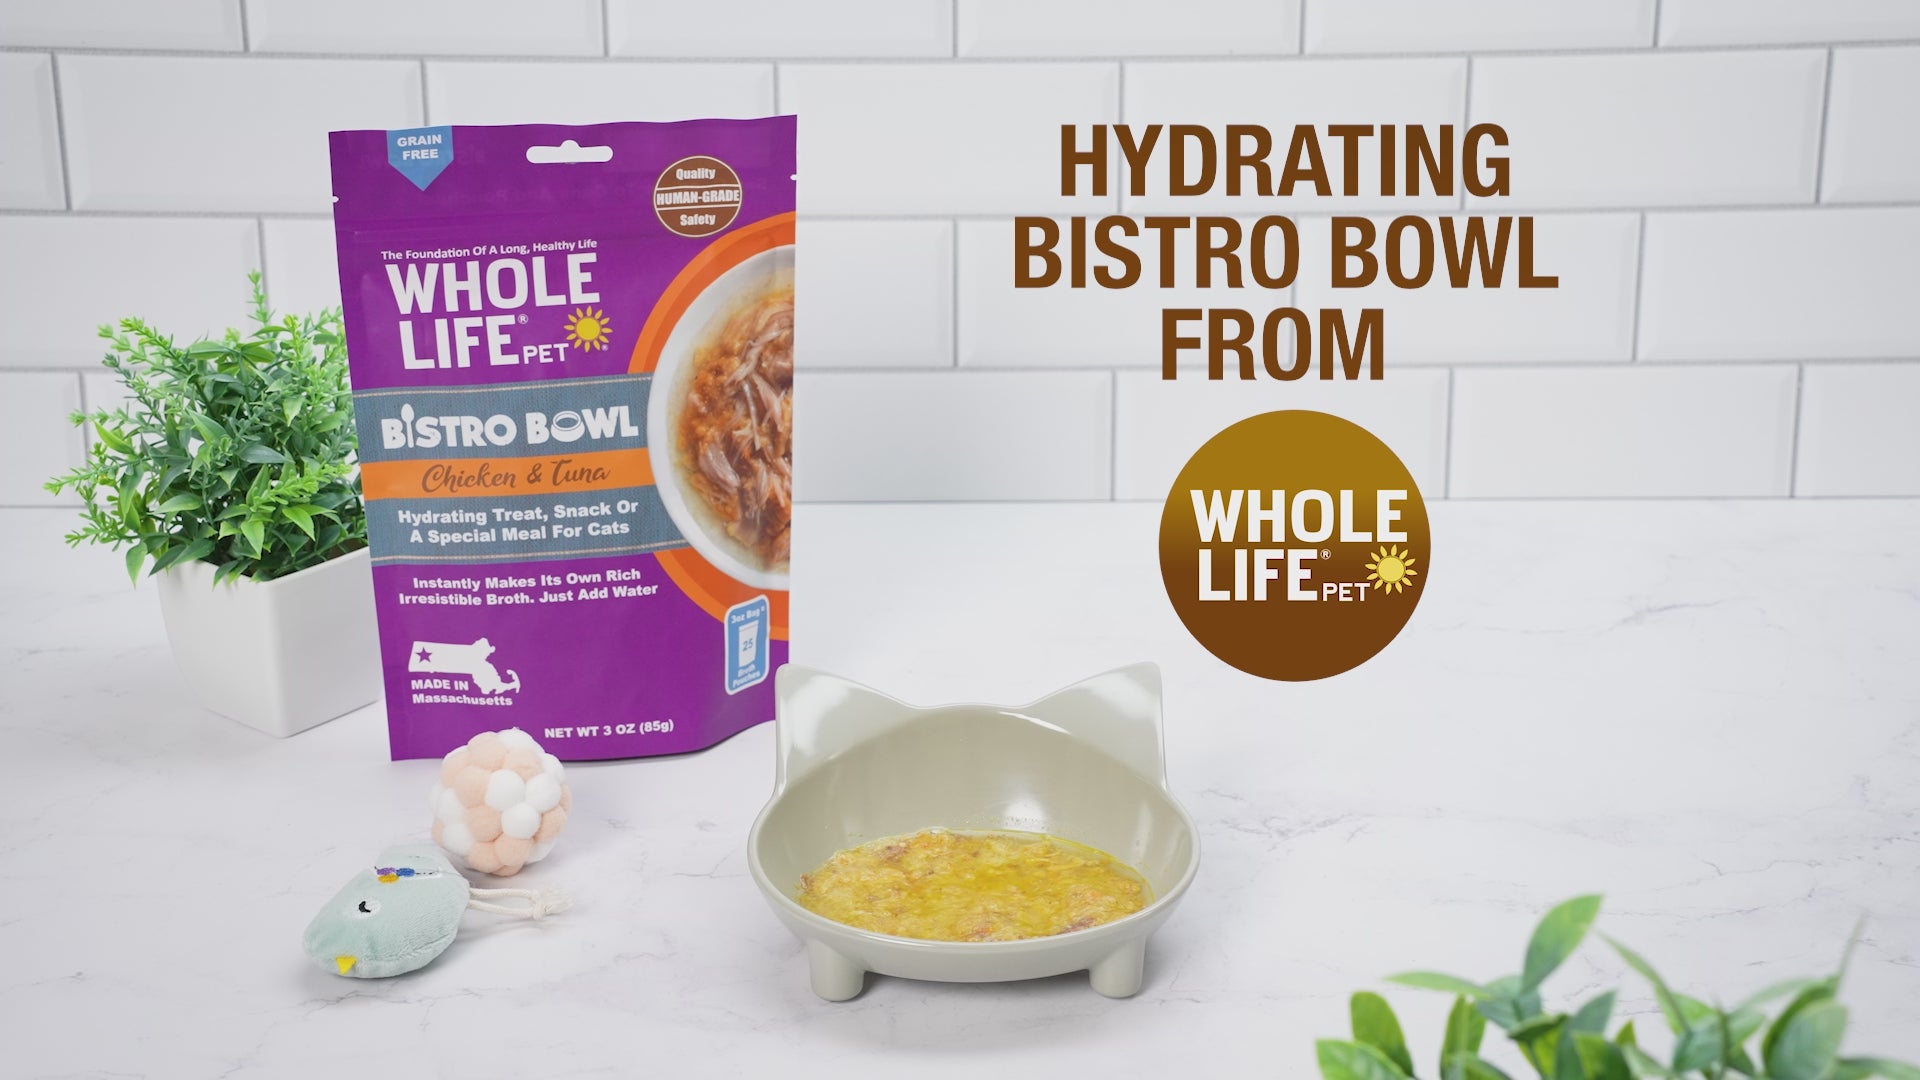 Bistro Bowls –  Shredded Chicken Hydrating Snack and Meal Compliment For Cats